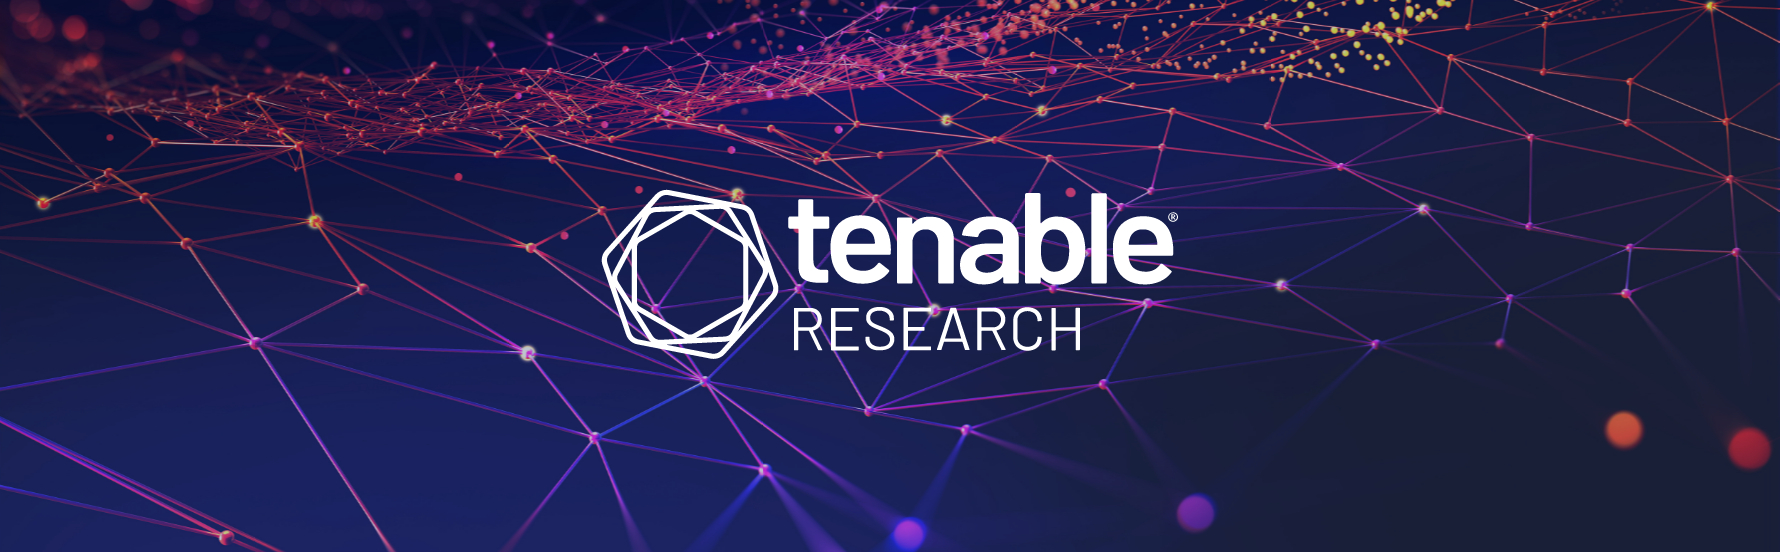 How to Use Tenable.io WAS to Find and Fix Sensitive Information Exposure in Microsoft Power Apps